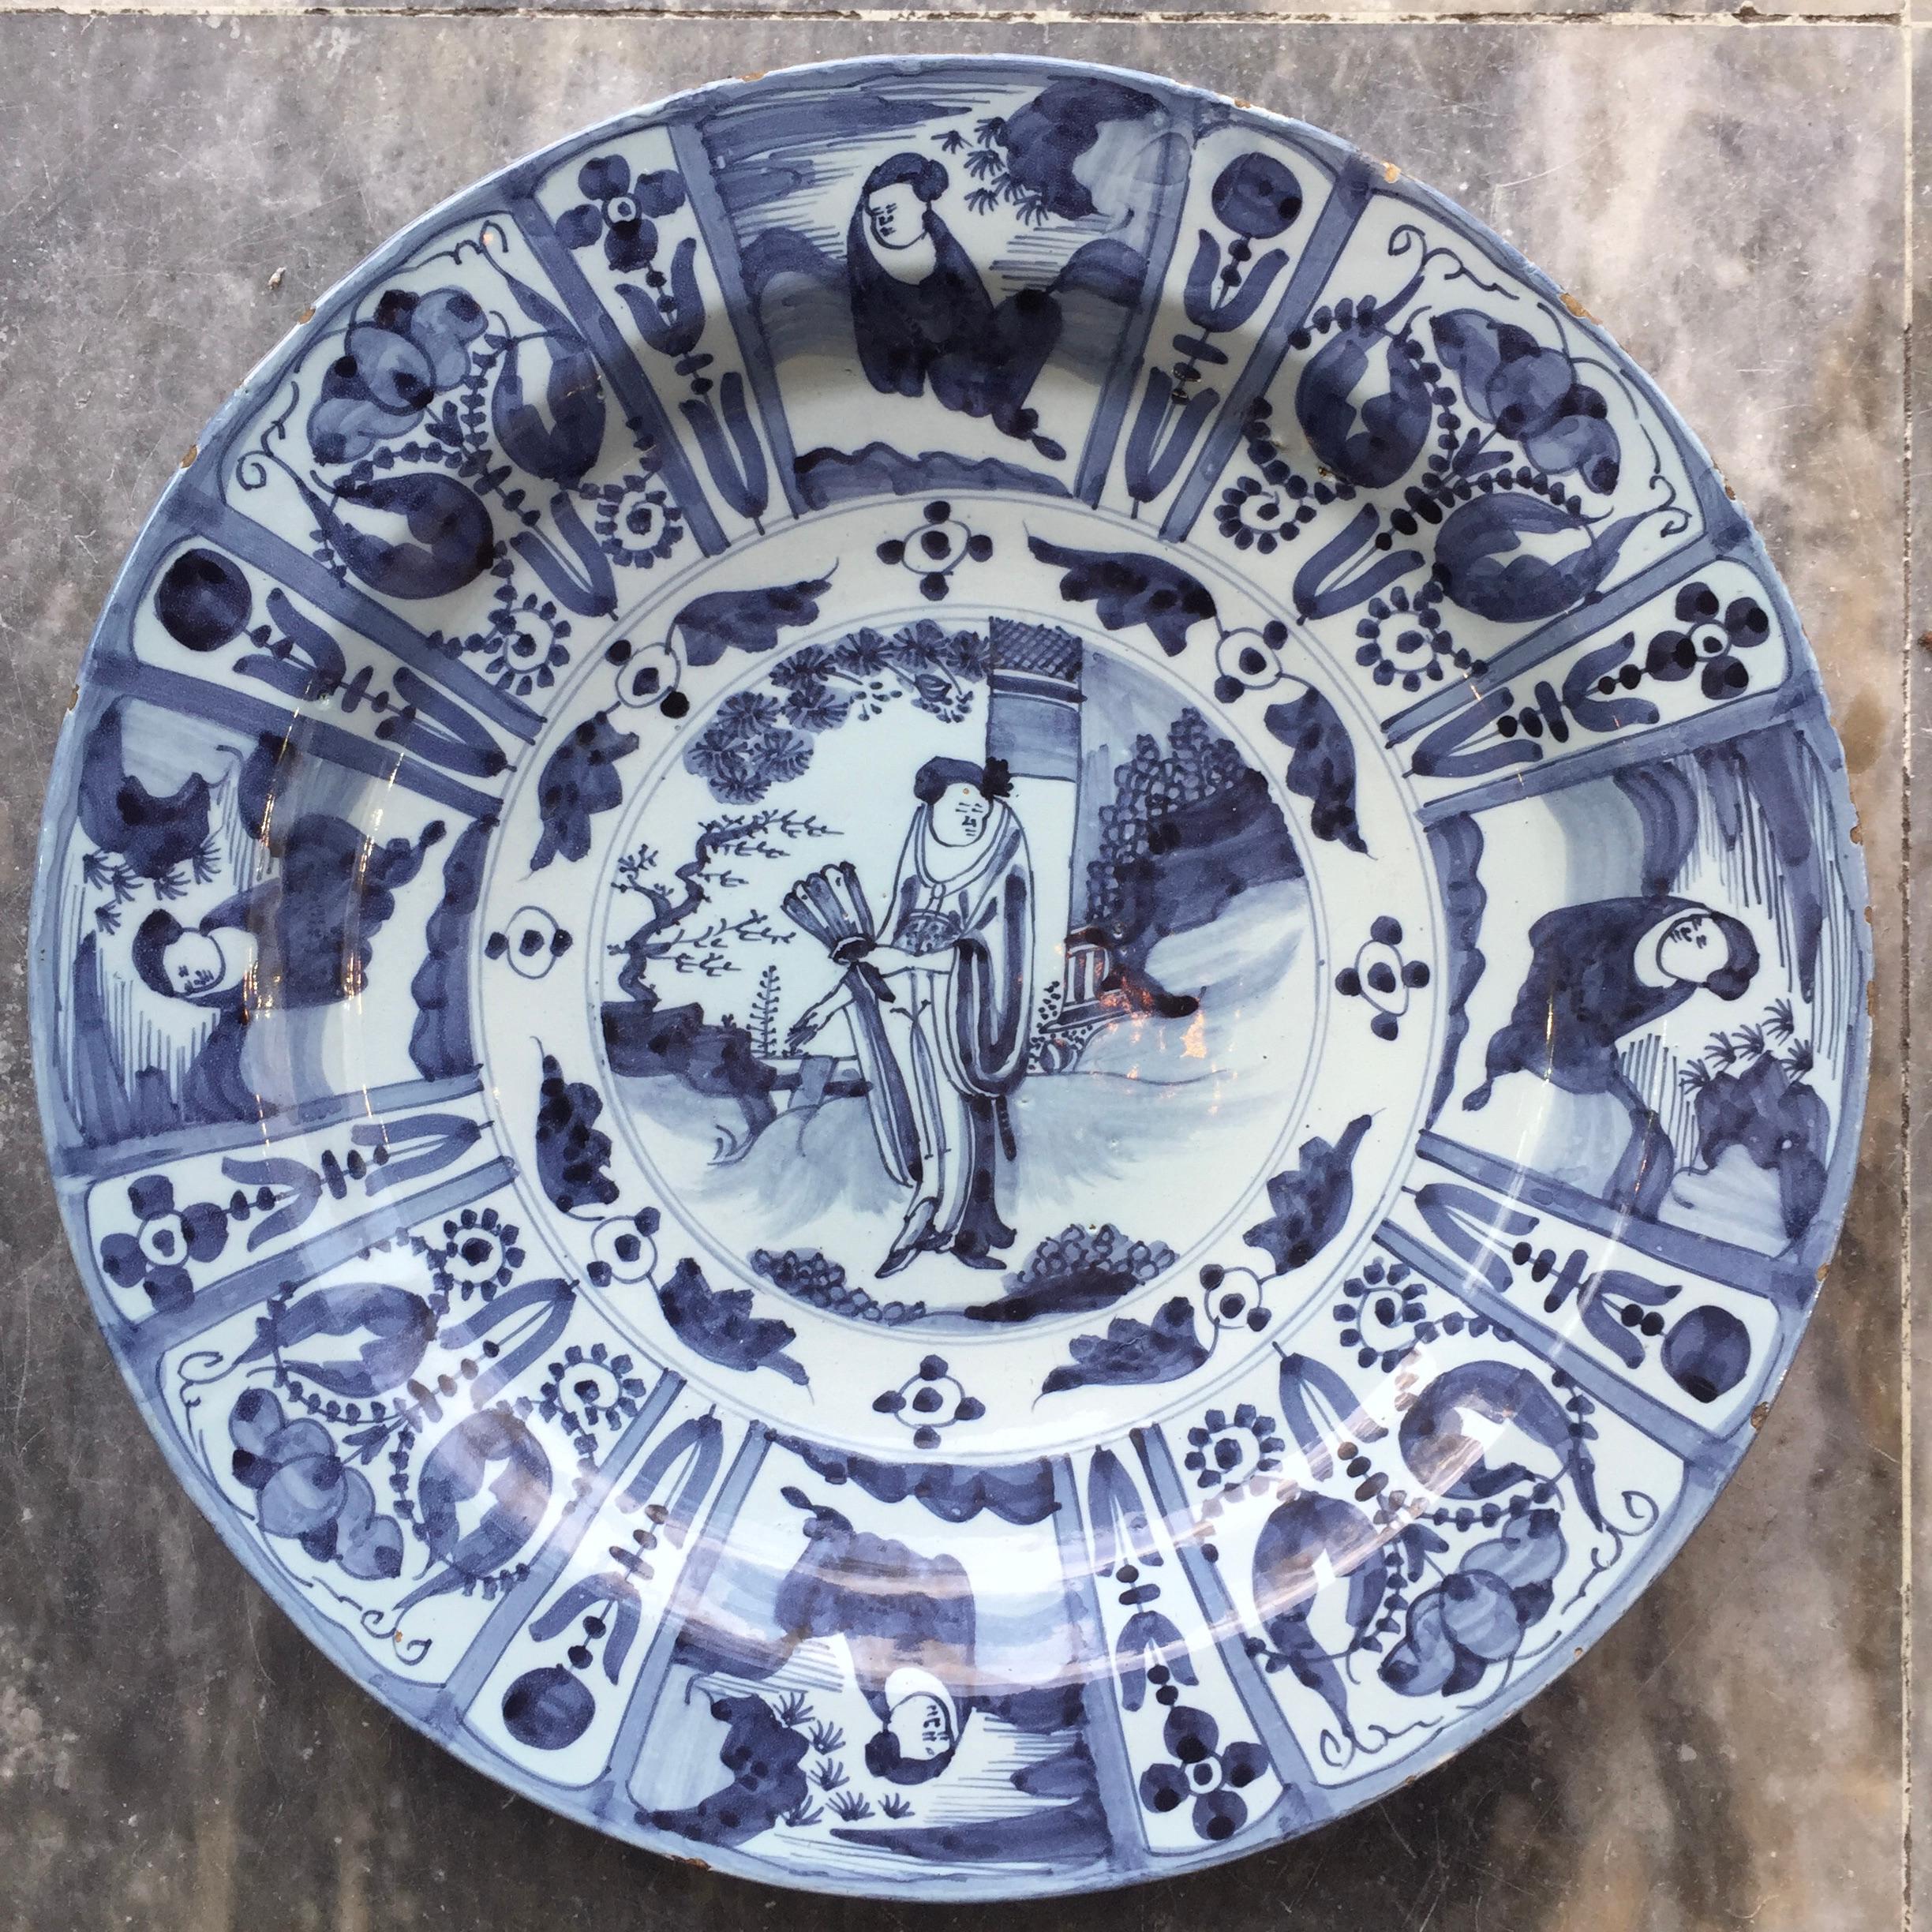 City: Delft
Workshop: Unknown
Date: Last quarter of the 17th century

A large blue and white plate in Wanli / Tianqi style
Decorated with Long Eliza in the center surrounded by eight cartouches with flowers and figures
Exact copy of the